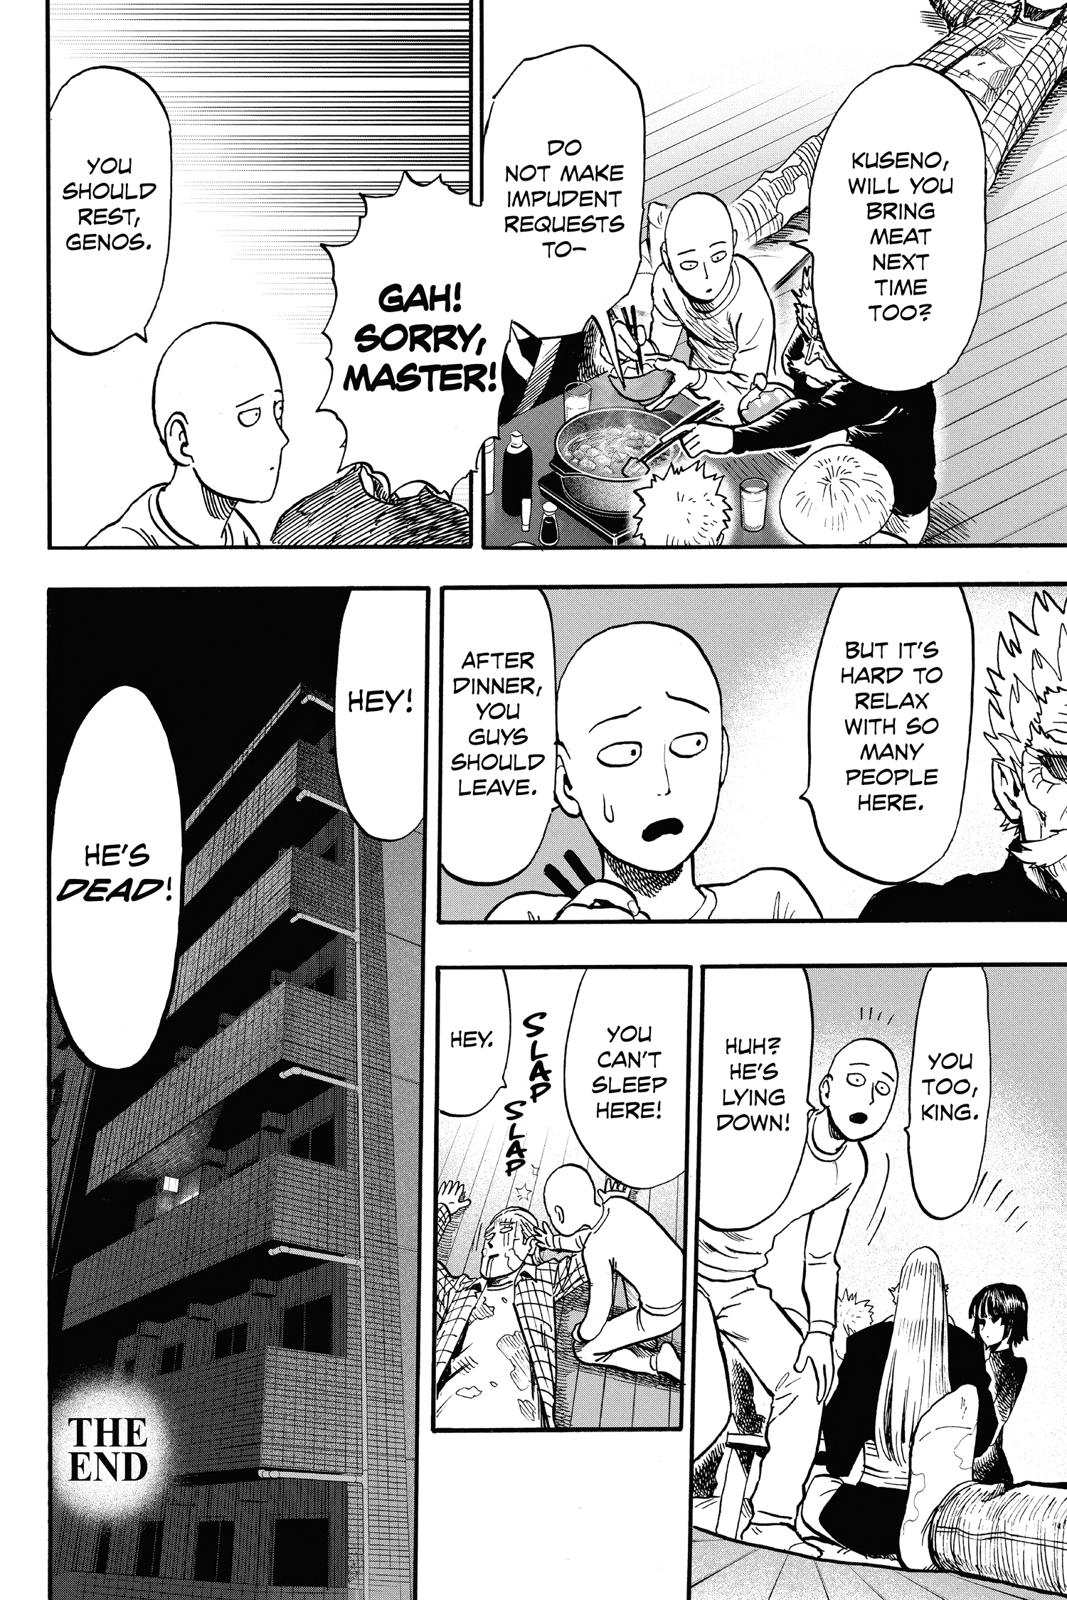 One-Punch Man, Punch 91 image 29